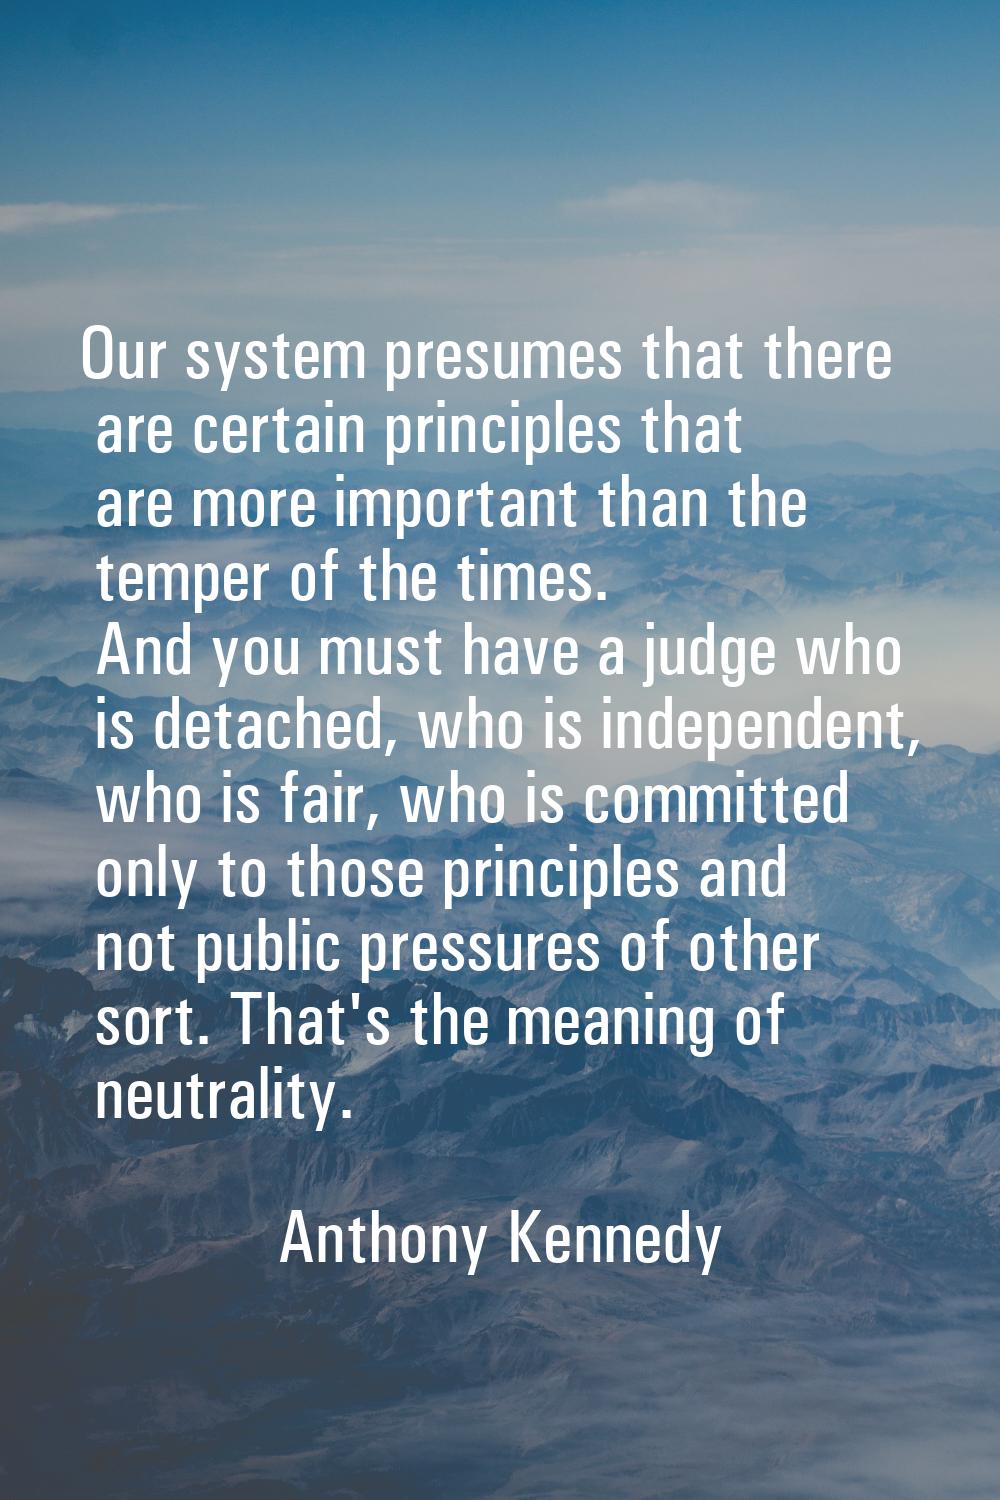 Our system presumes that there are certain principles that are more important than the temper of th